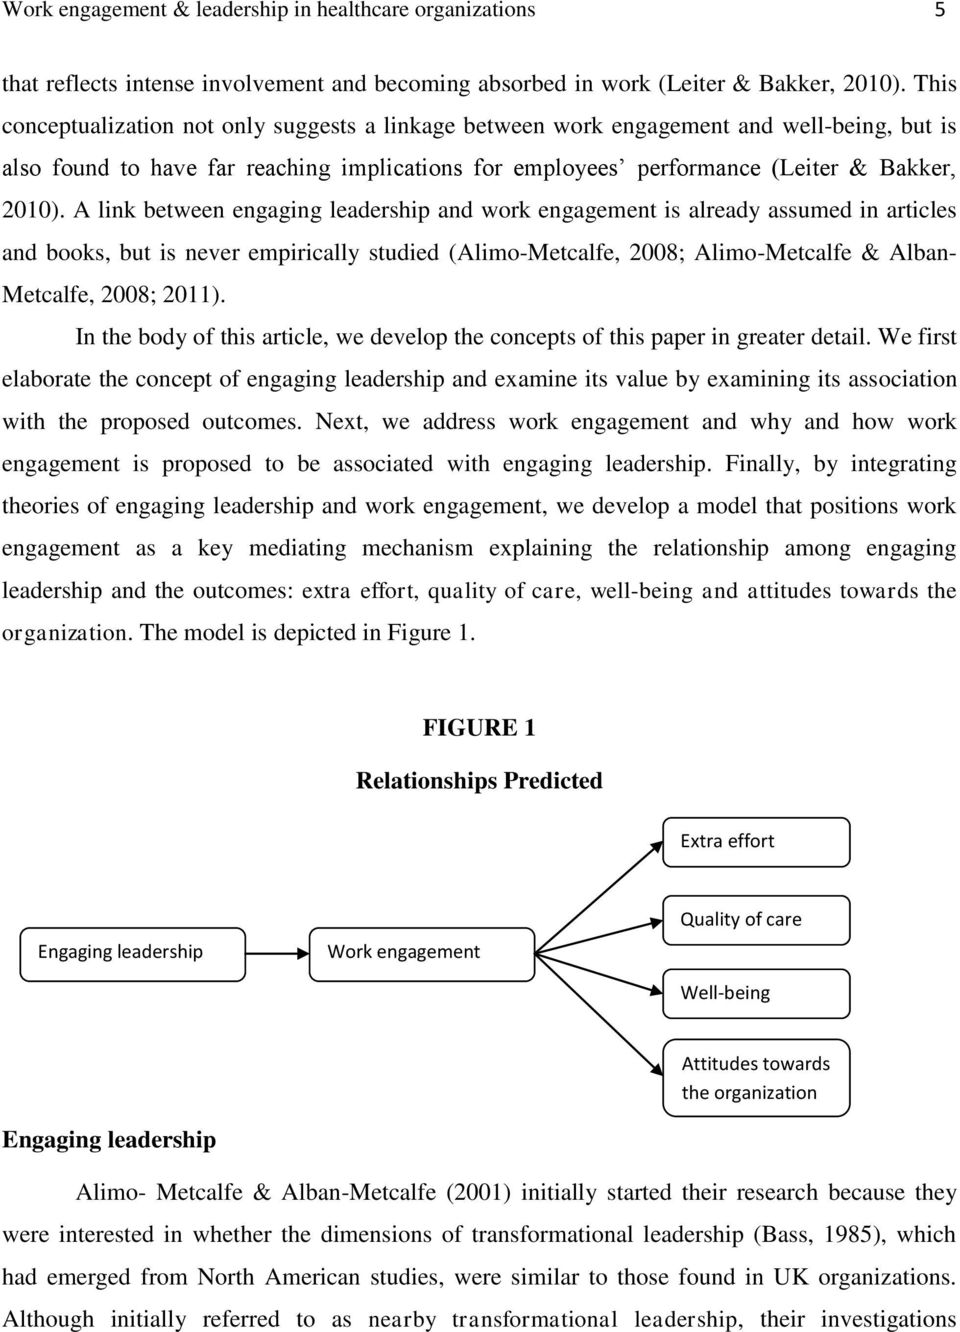 A link between engaging leadership and work engagement is already assumed in articles and books, but is never empirically studied (Alimo-Metcalfe, 2008; Alimo-Metcalfe & Alban- Metcalfe, 2008; 2011).